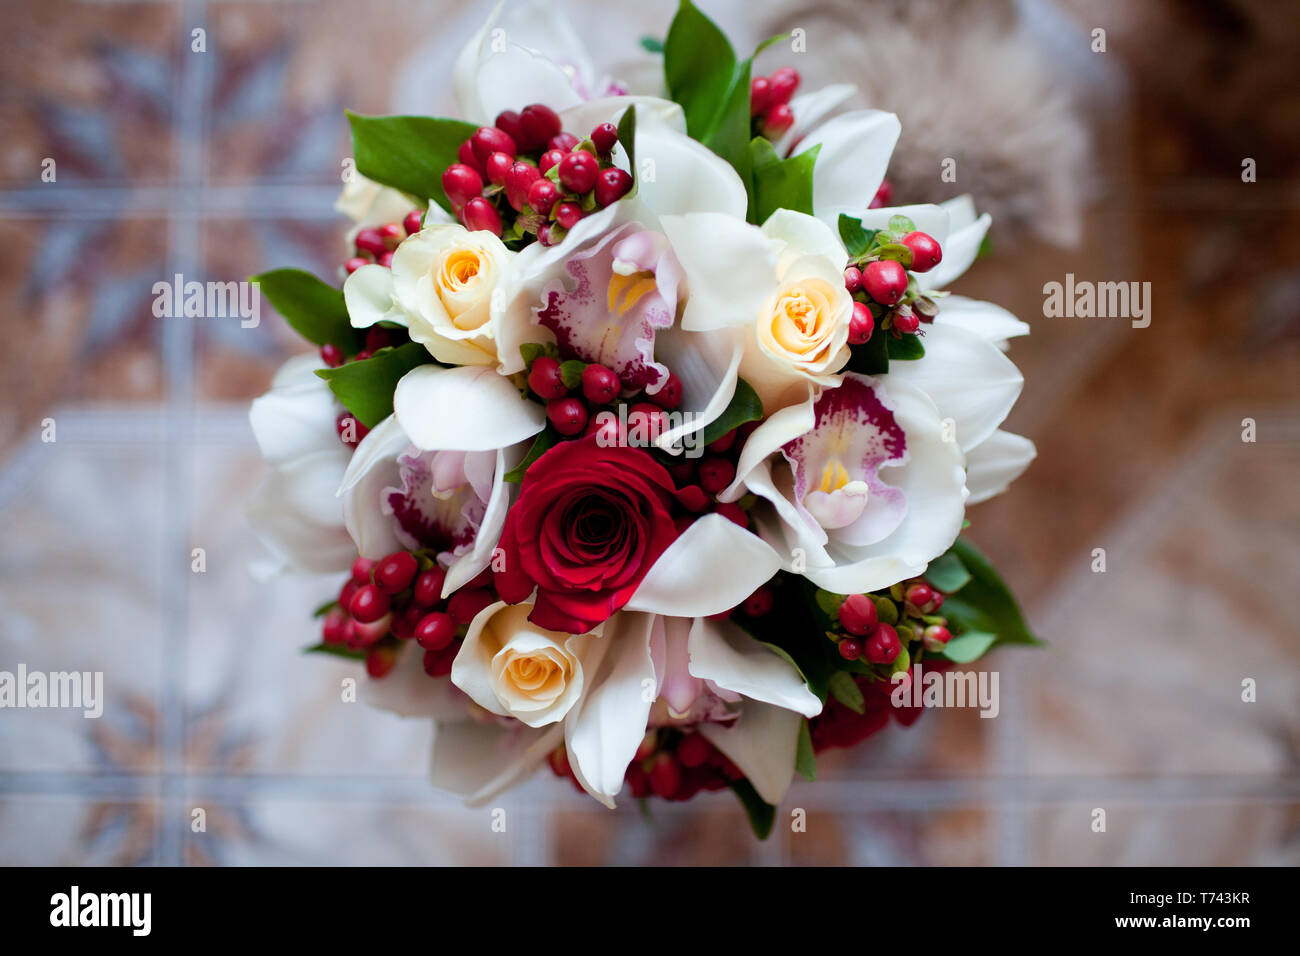 Exquisite bouquet of red and white roses with orchids, complemented by red hypericum berries Stock Photo